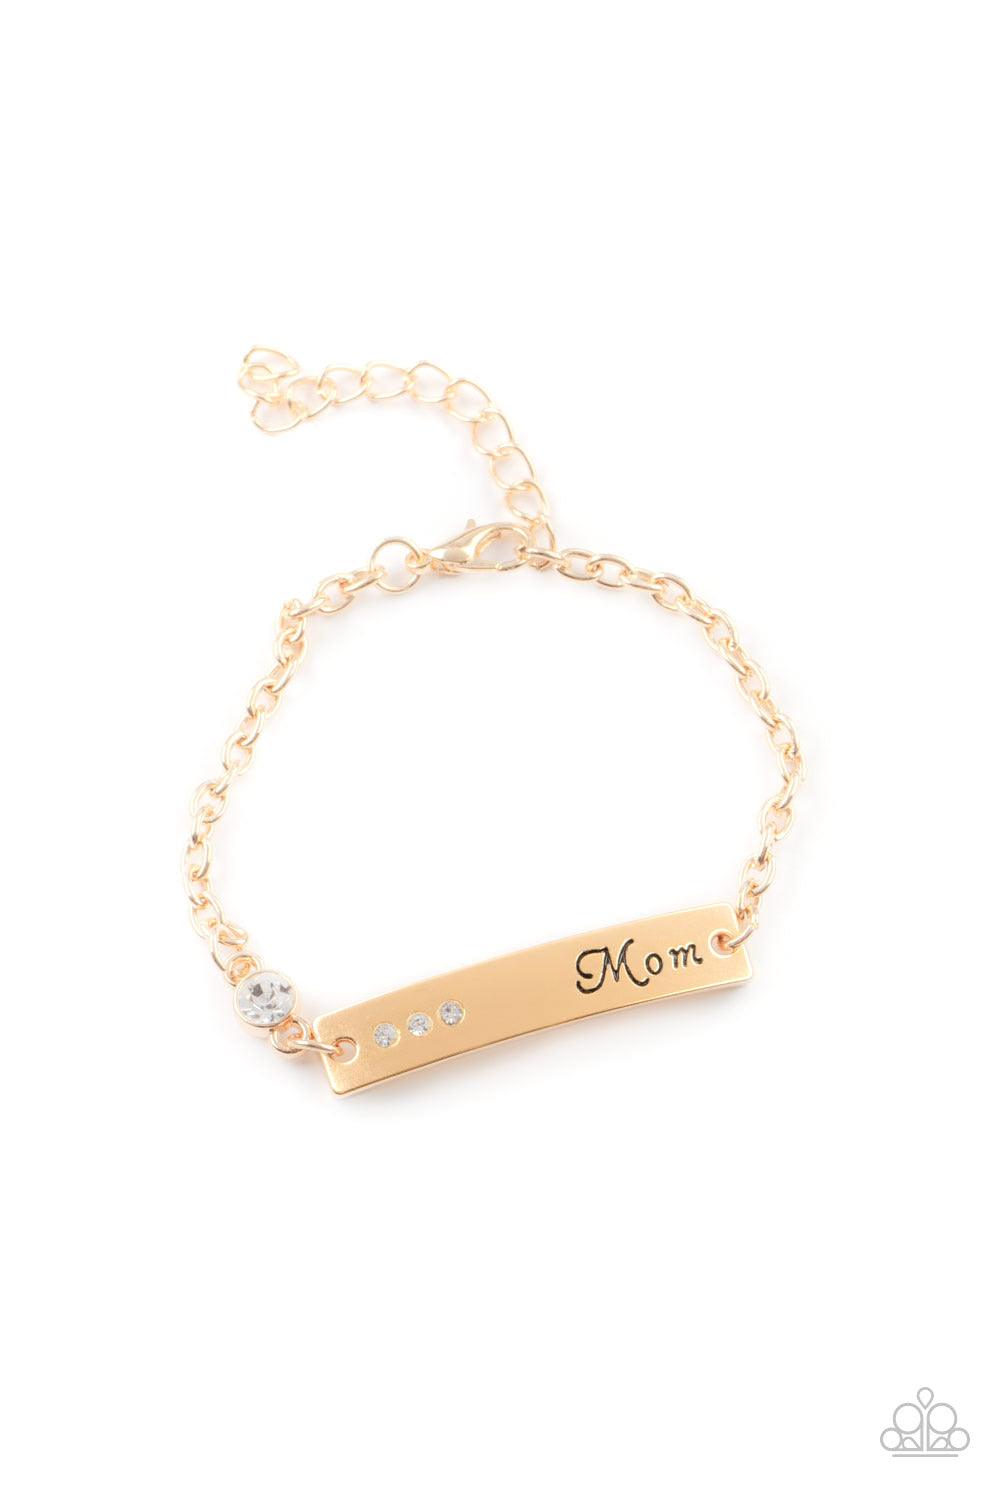 Paparazzi Accessories Mom Always Knows - Gold Infused with a glittery white rhinestone charm, a curved gold plate is dotted in dainty white rhinestones and stamped in the word, "Mom," as it delicately attaches to a dainty gold chain around the wrist for a